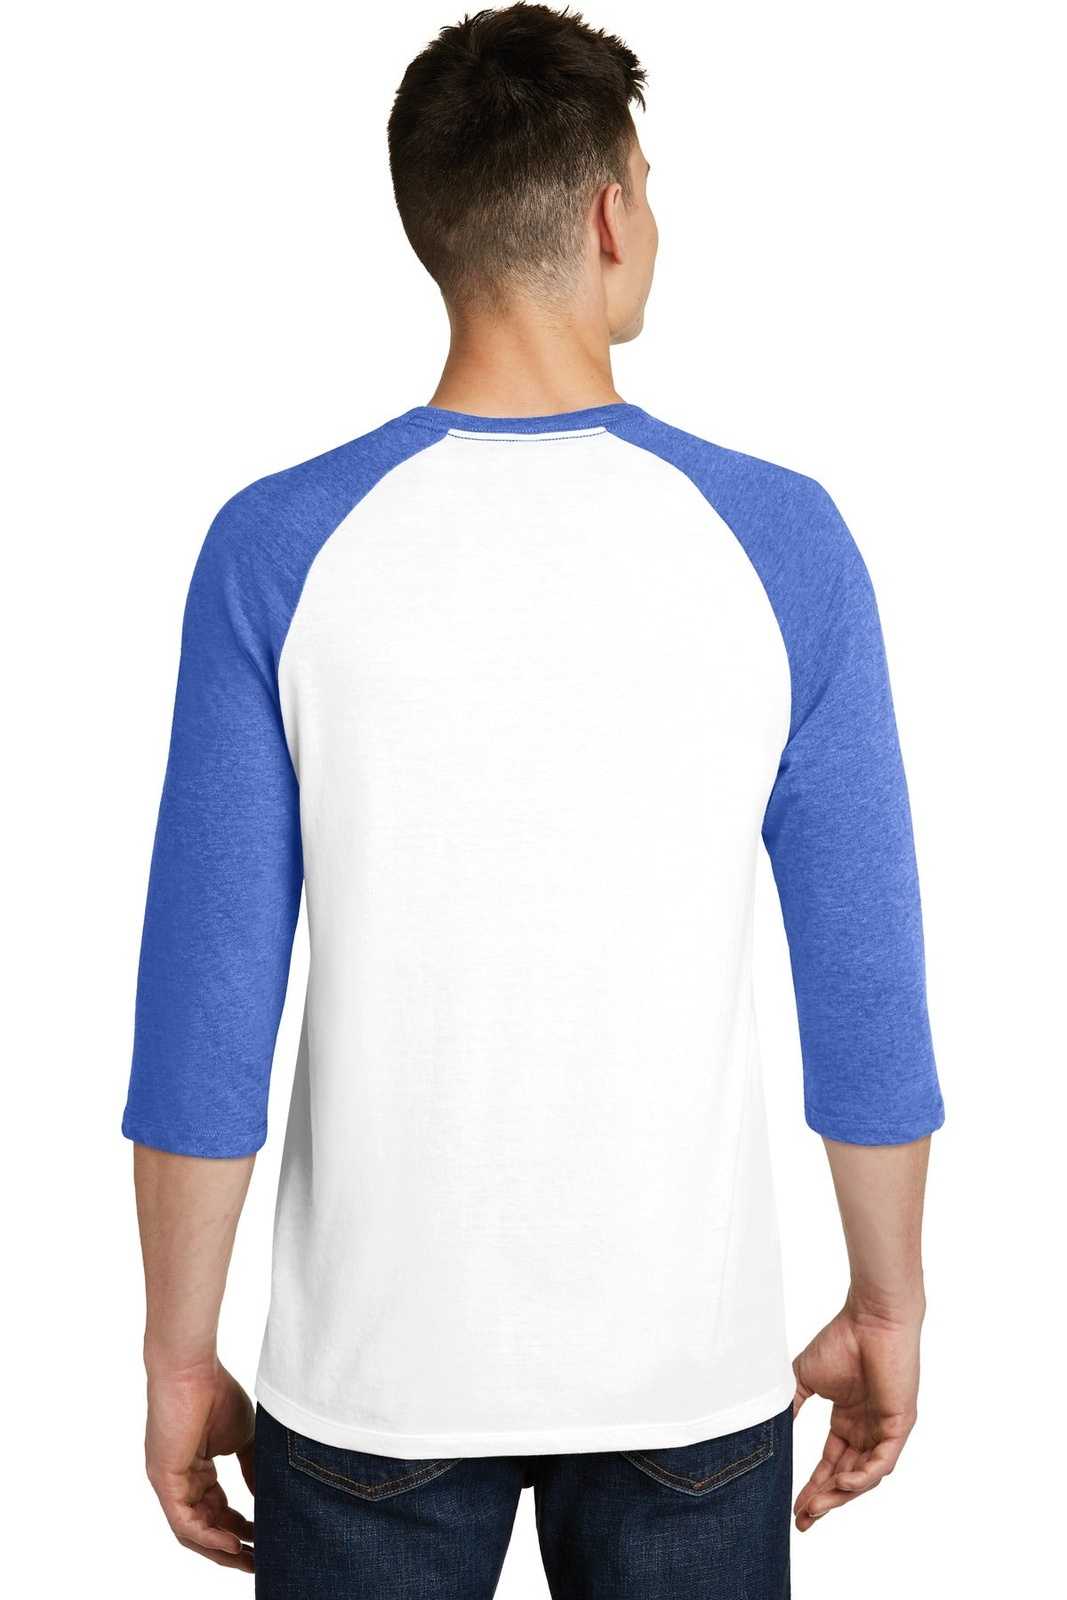 District DT6210 Very Important Tee 3/4-Sleeve Raglan - Royal Frost White - HIT a Double - 2